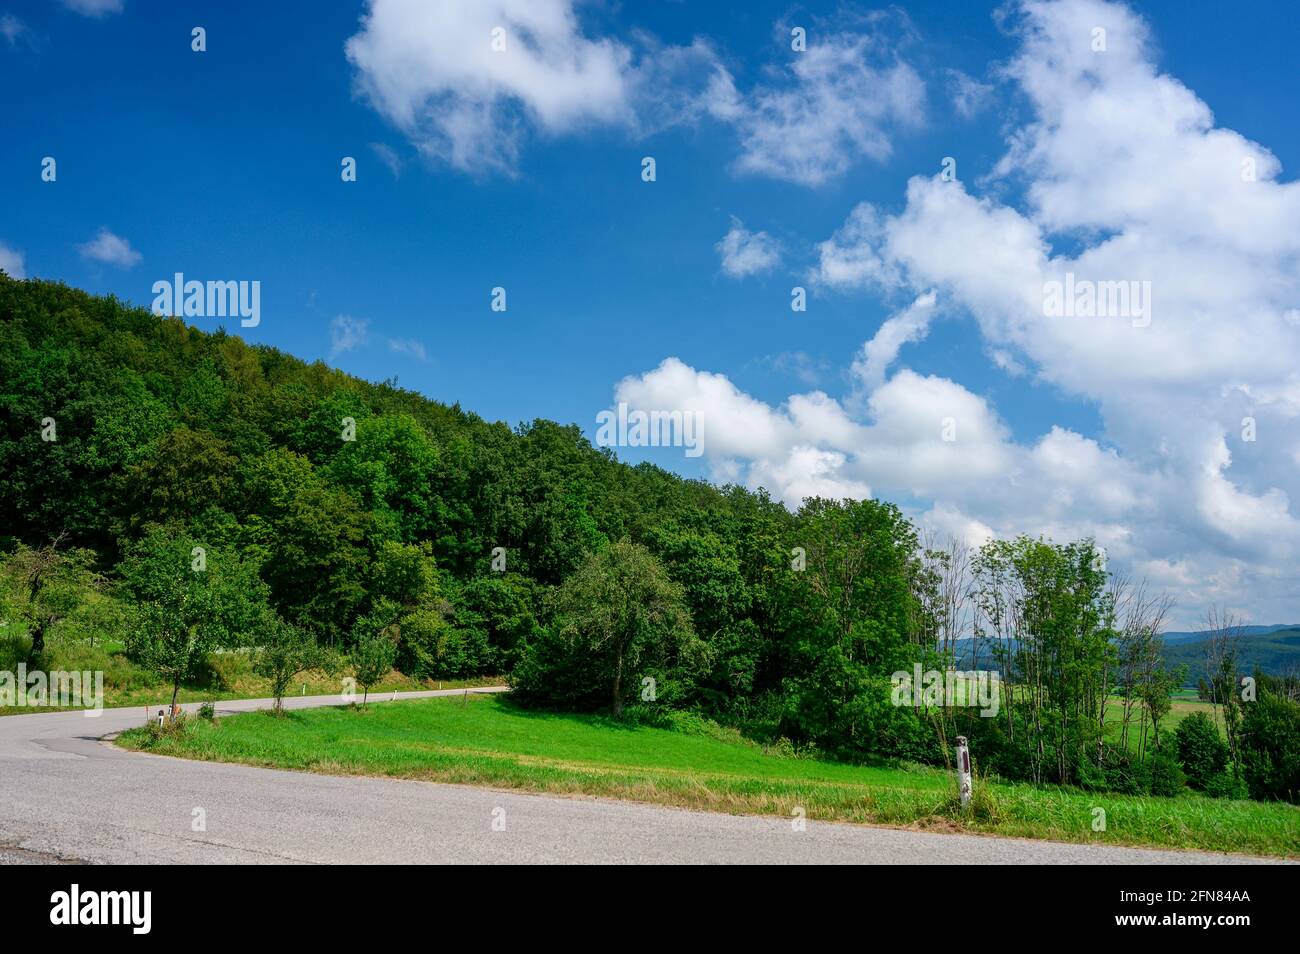 A narrow country road blends into the lush green summer landscape and is framed by a deep blue sky with a few white clouds. Stock Photo